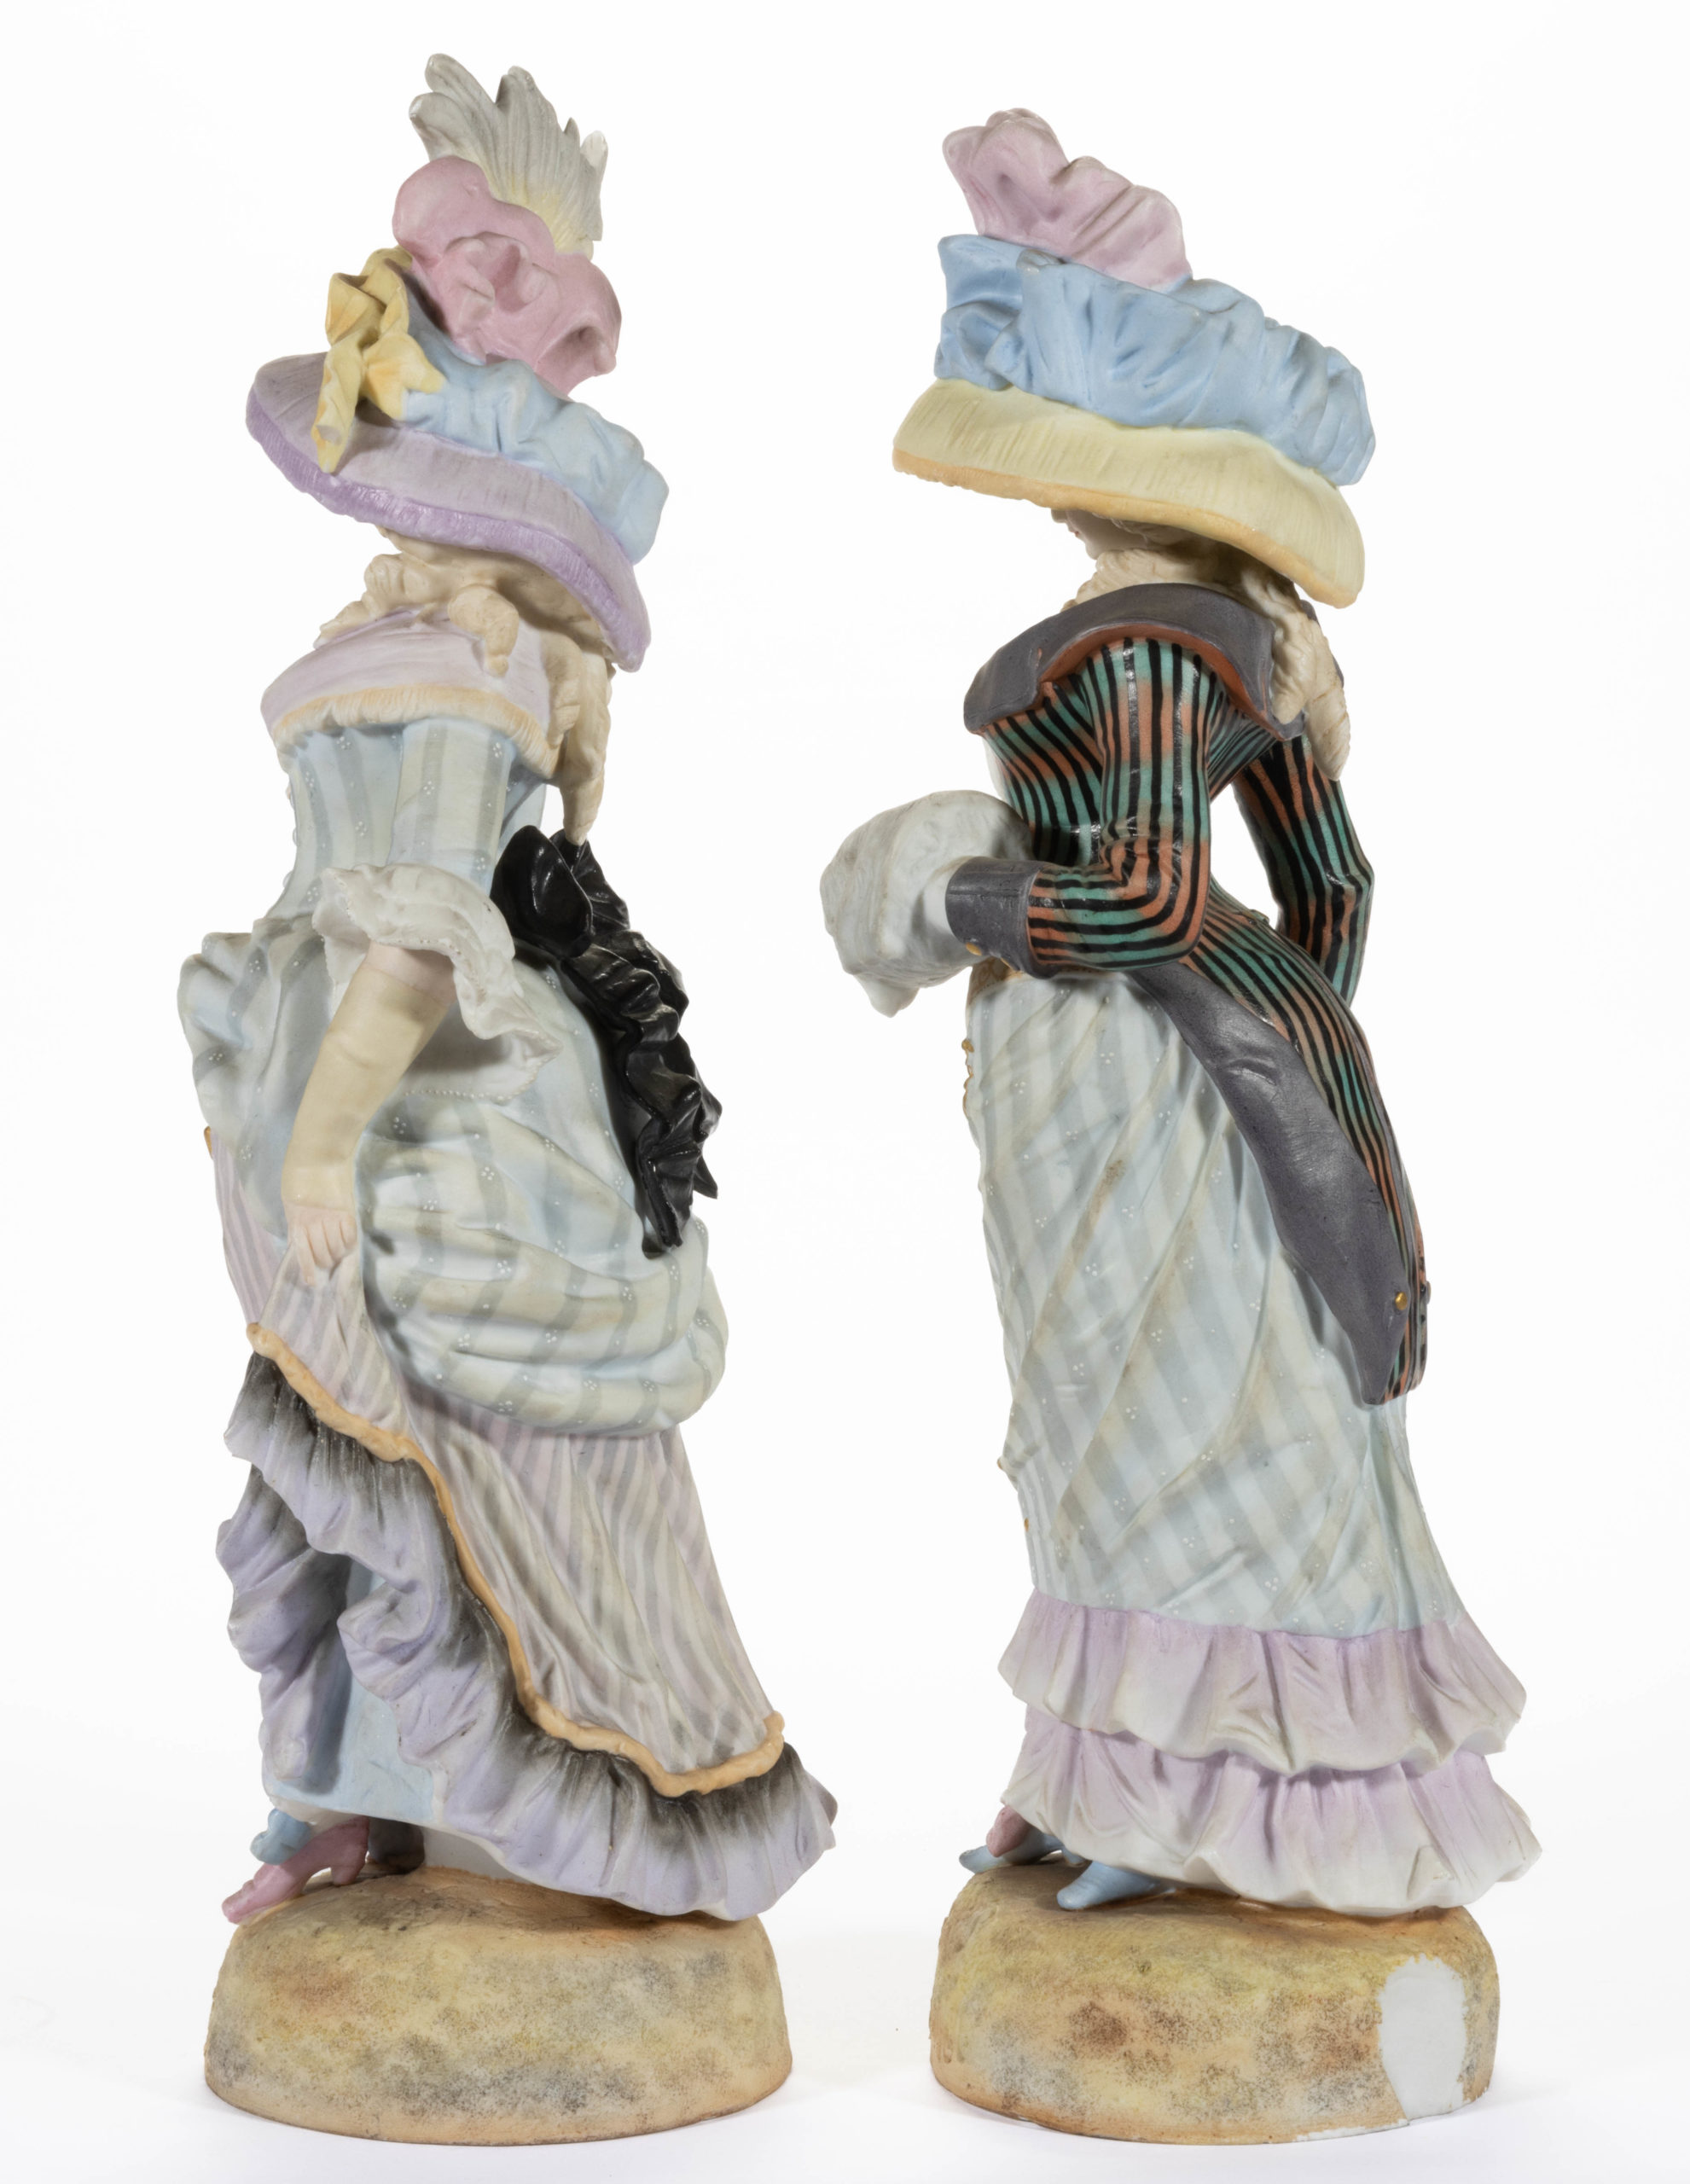 CONTINENTAL BISQUE PORCELAIN WOMEN FIGURAL PAIRS, LOT OF TWO,